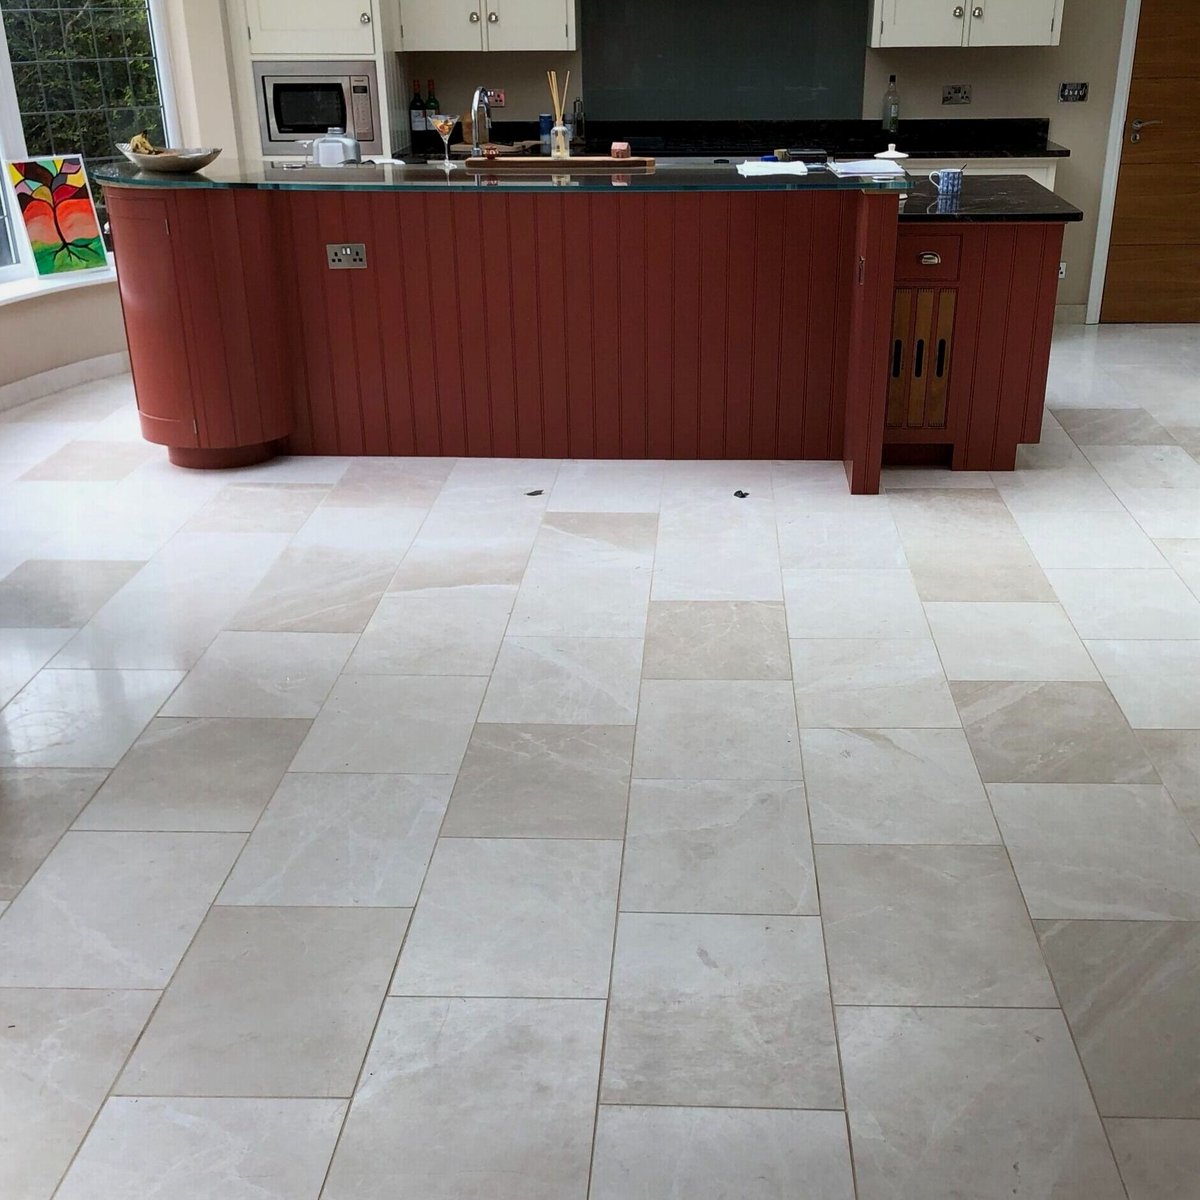 The kitchen is the heart of the home and we love to keep the natural stone in yours looking stunning. #naturalstone #stoneexperts #marble #restoratation #homeimprovement #cleaning #polishing #luxury #luxuryservice